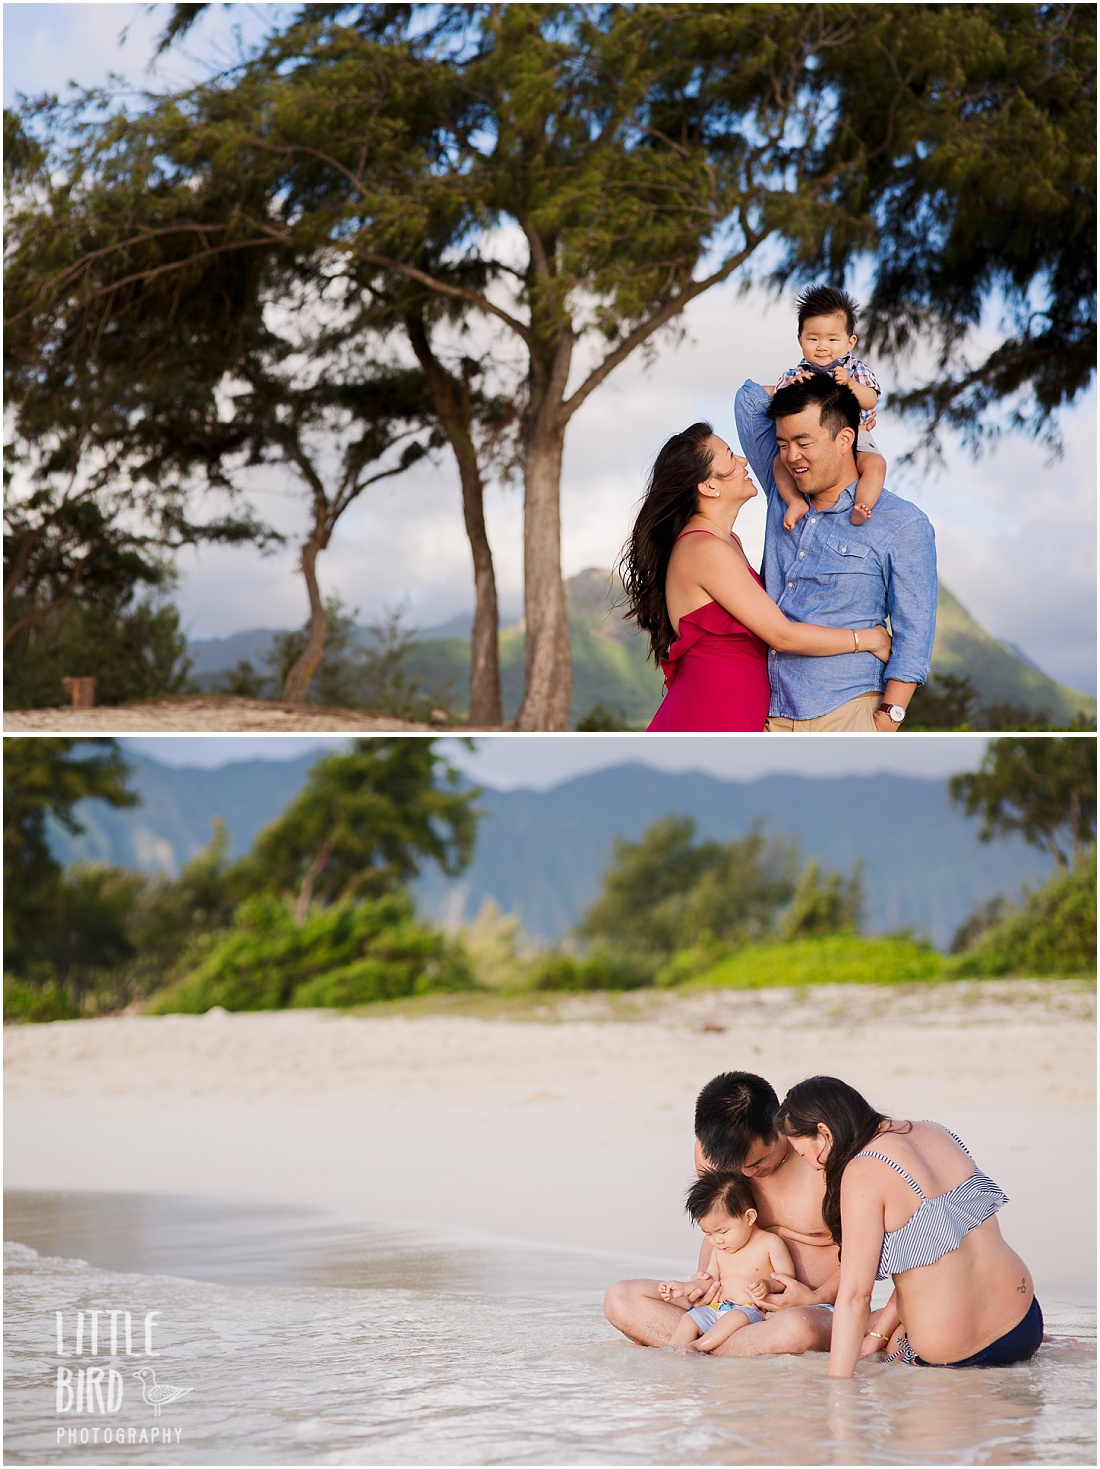 family of three portrait at the beach in hawaii